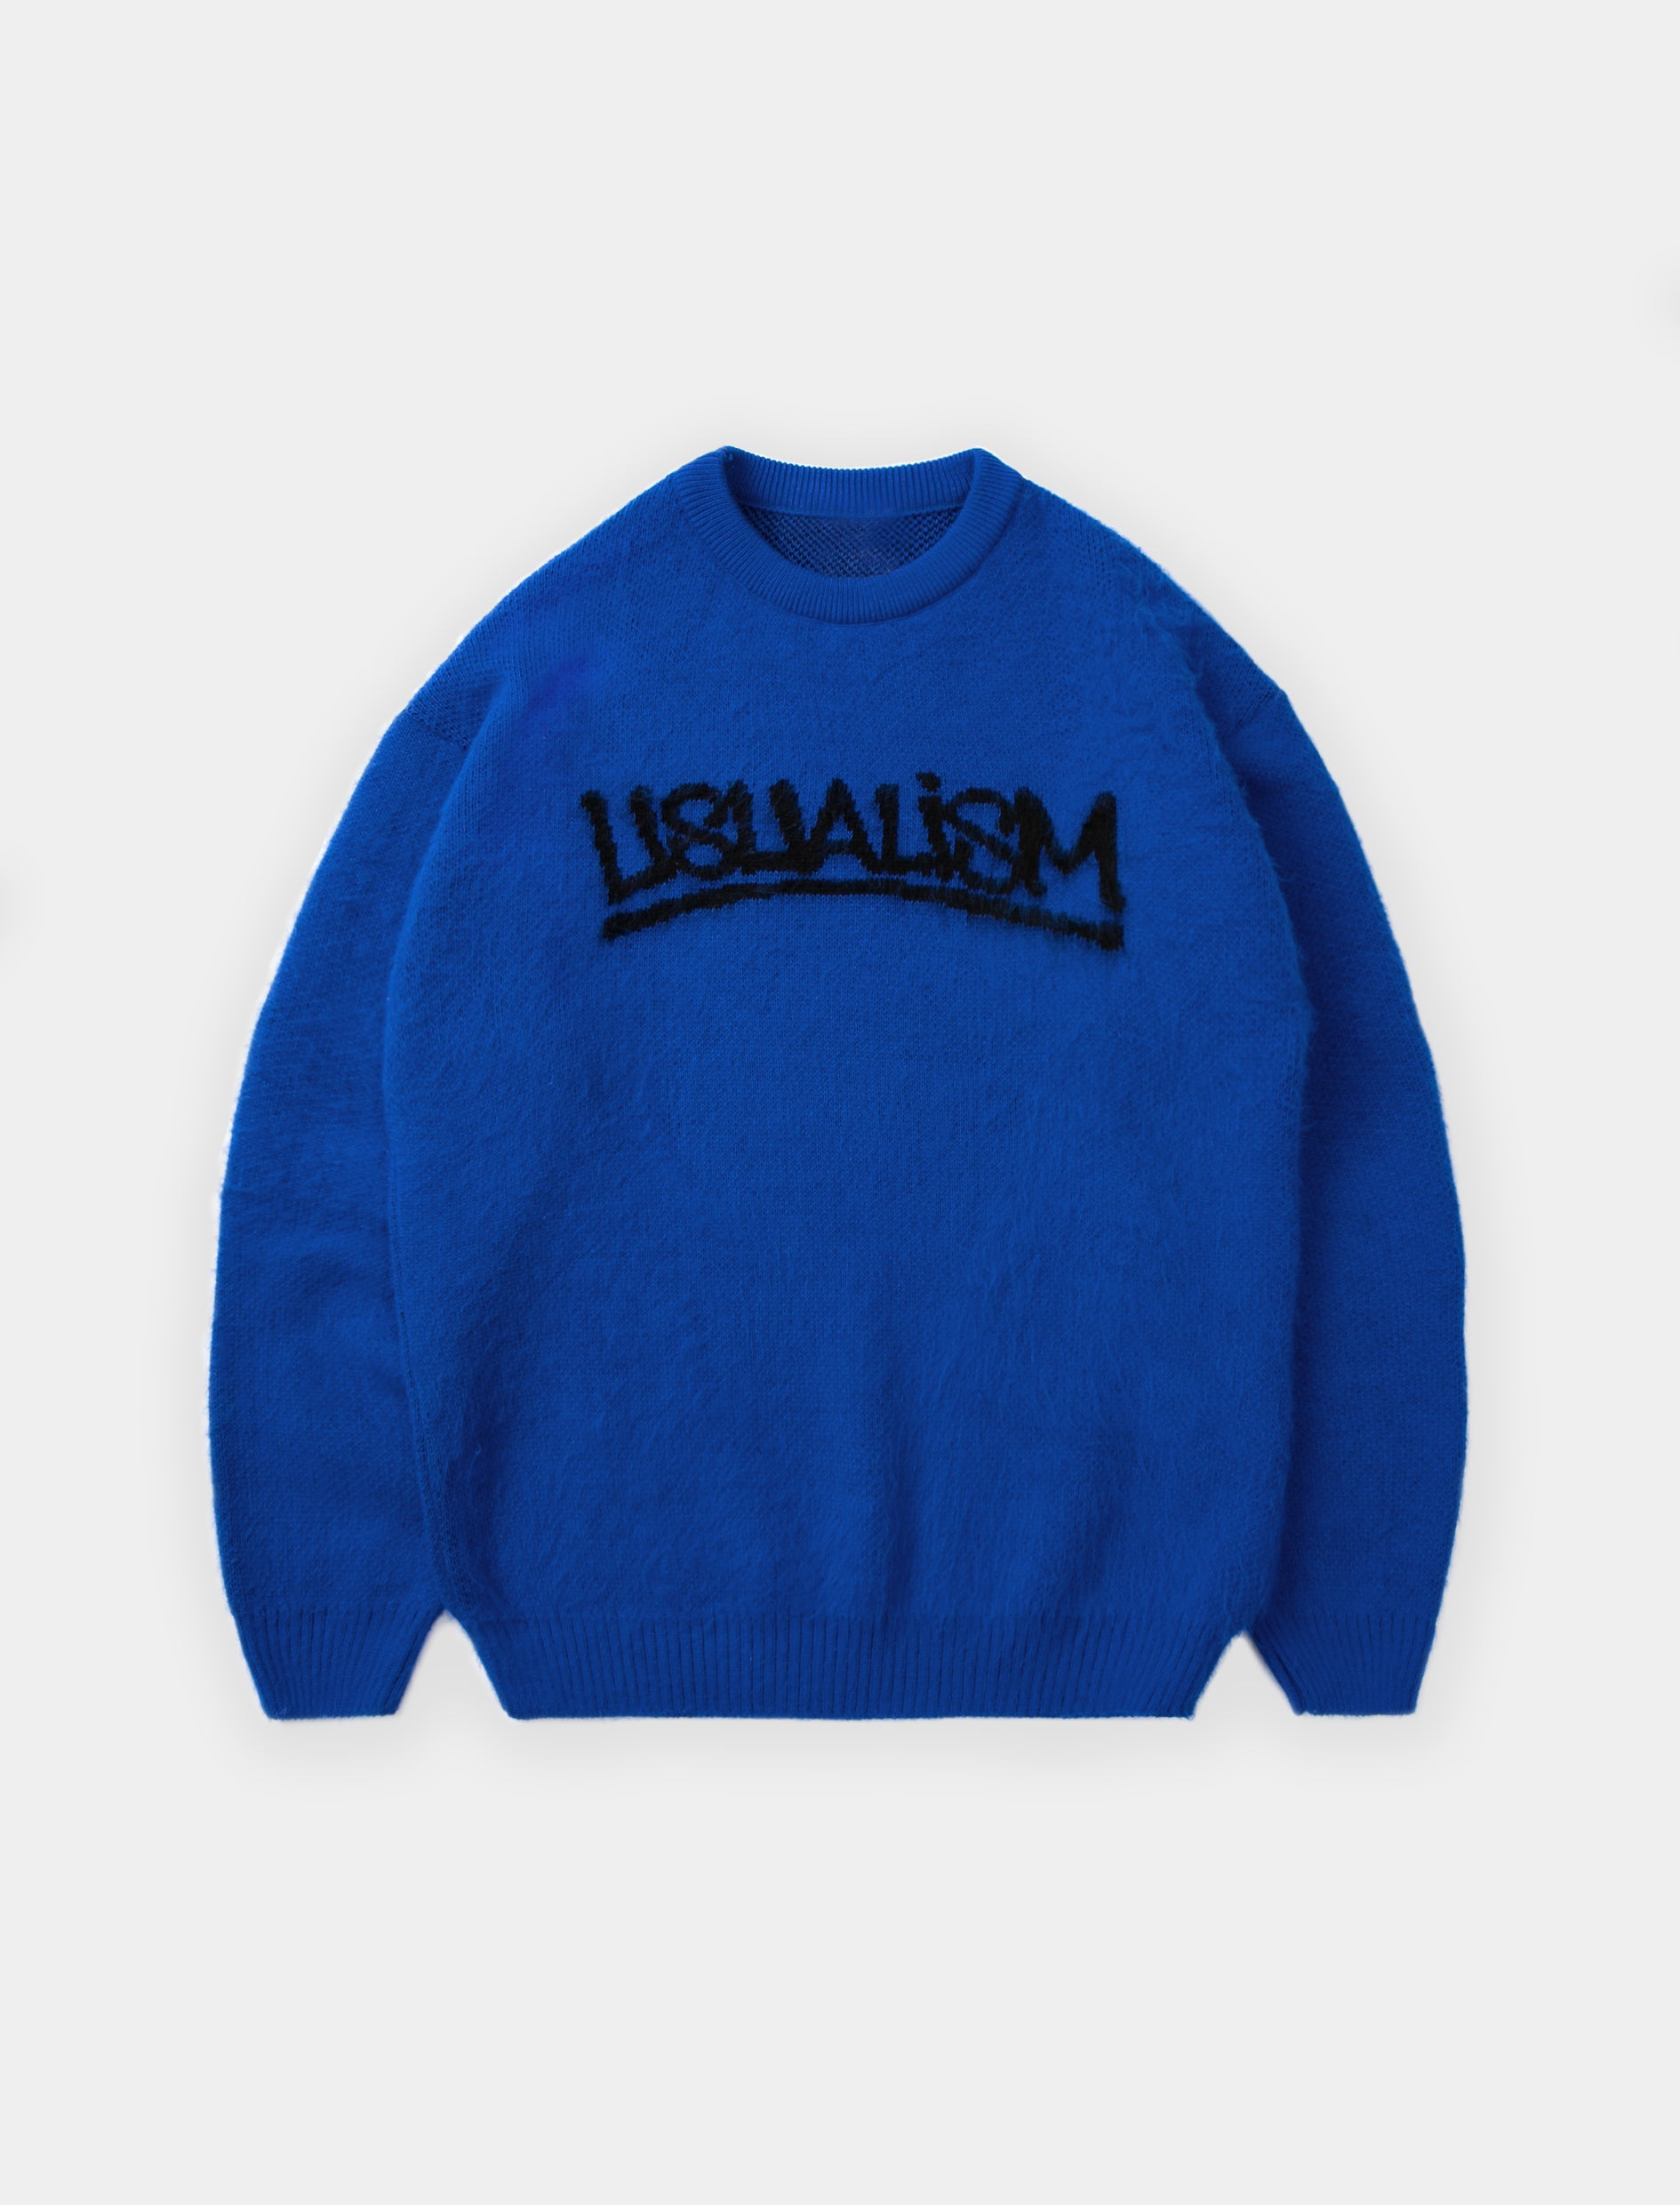 USUALISM SWEATER